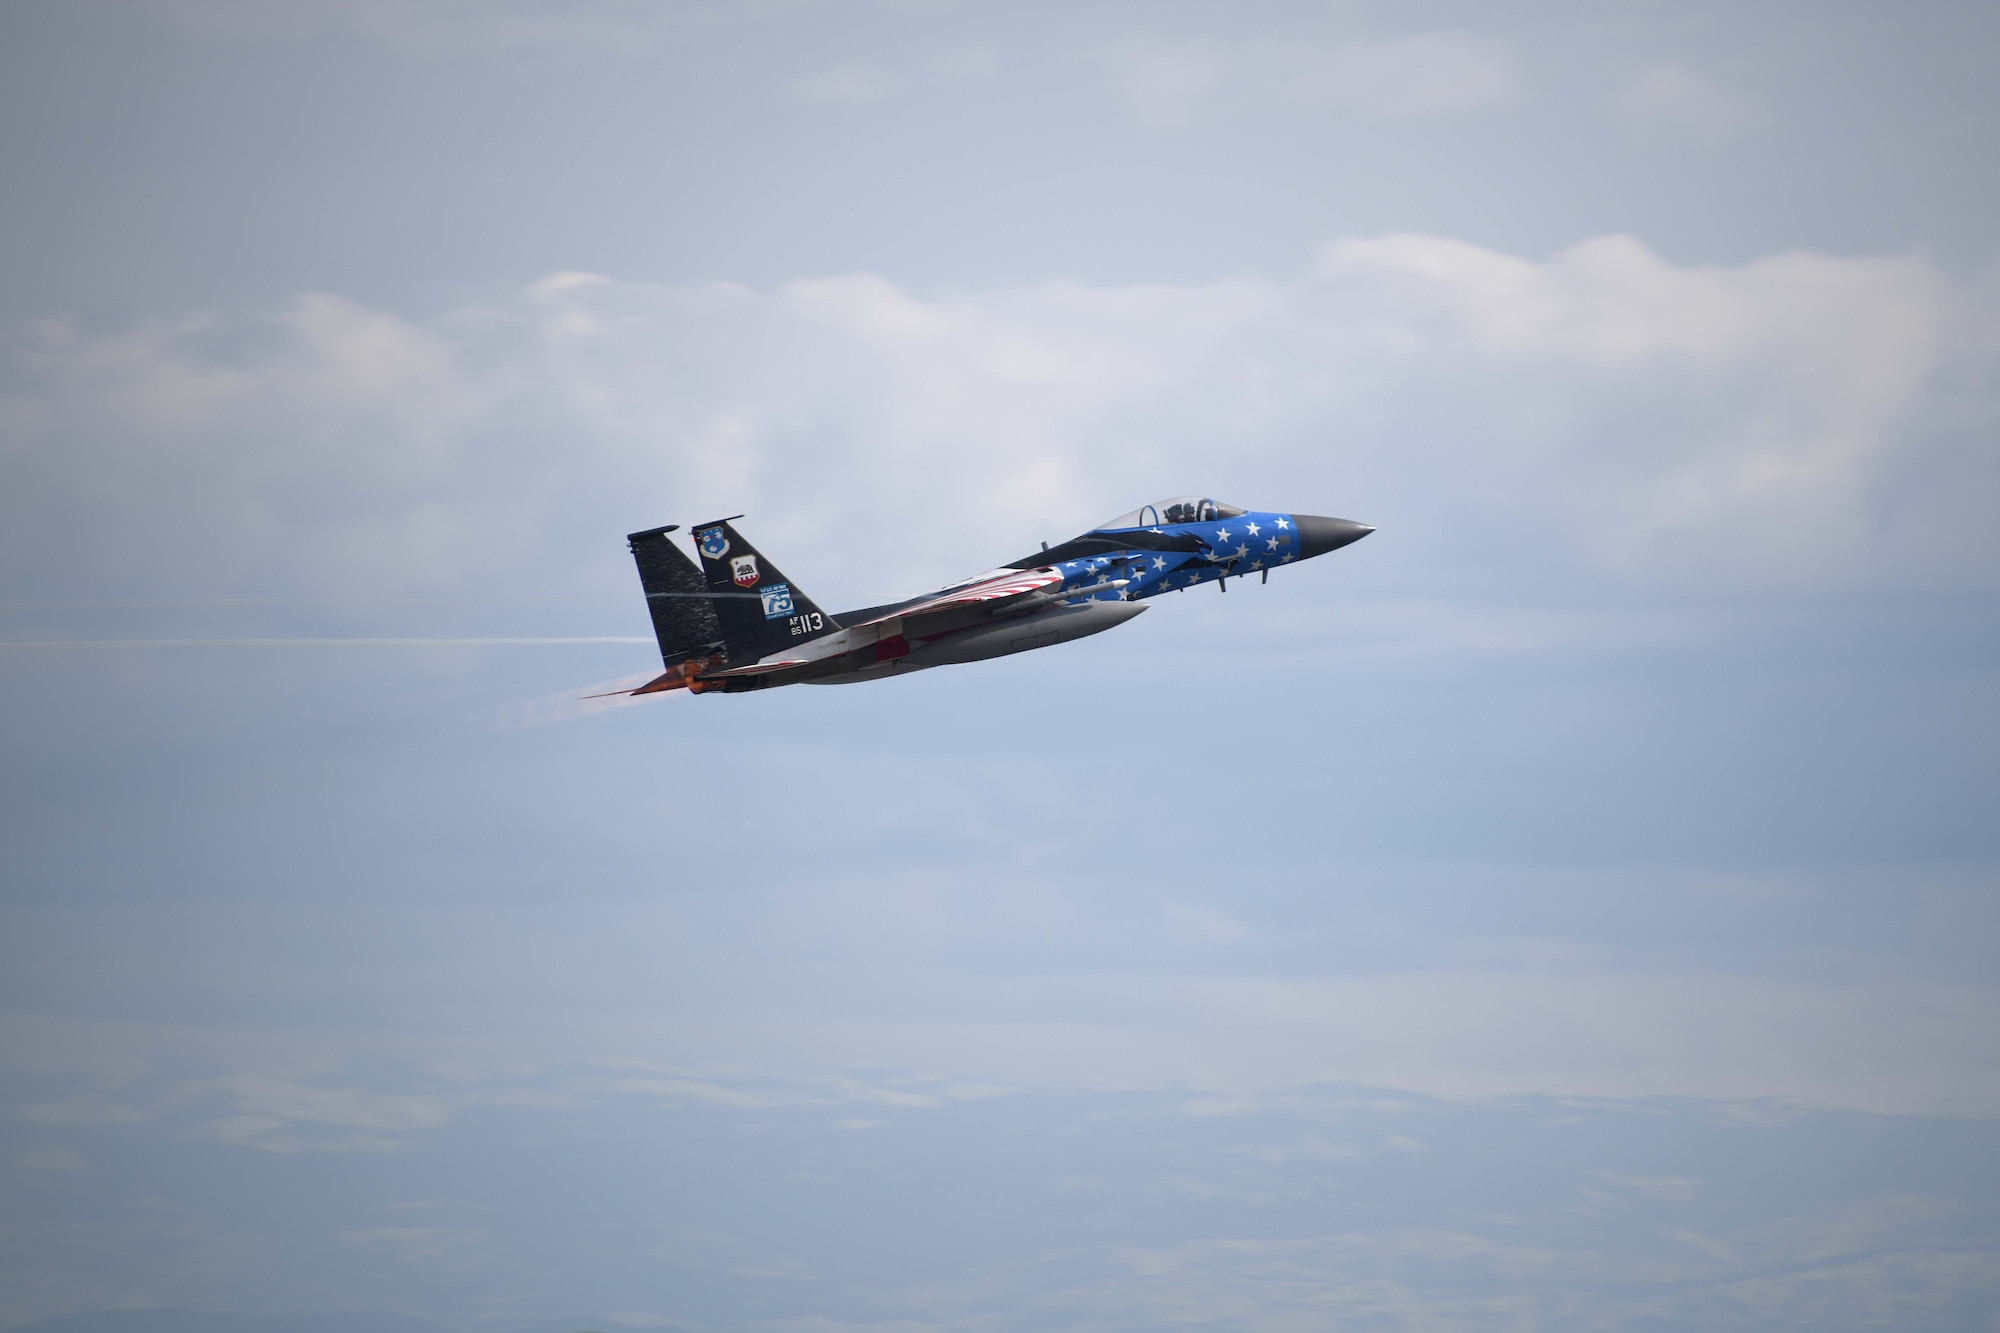 A photo of a military jet painted in a red, white and blue American flag pain scheme taken mid flight